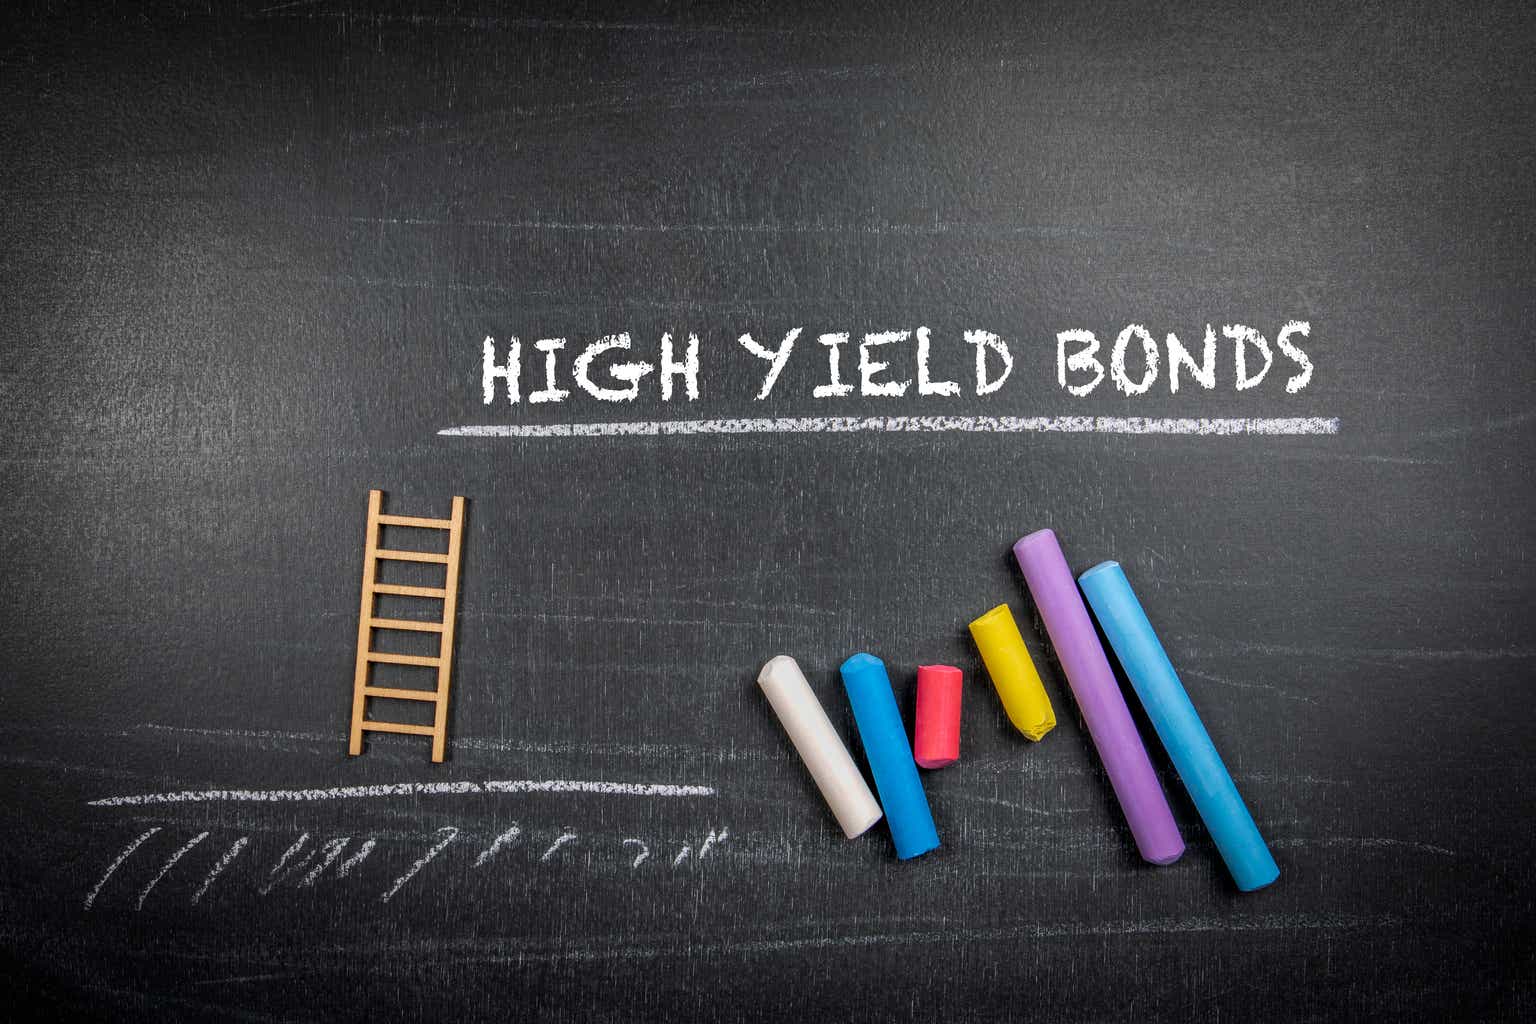 Counting On Fed Rate Cuts? Consider Adding Asia High Yield Instead